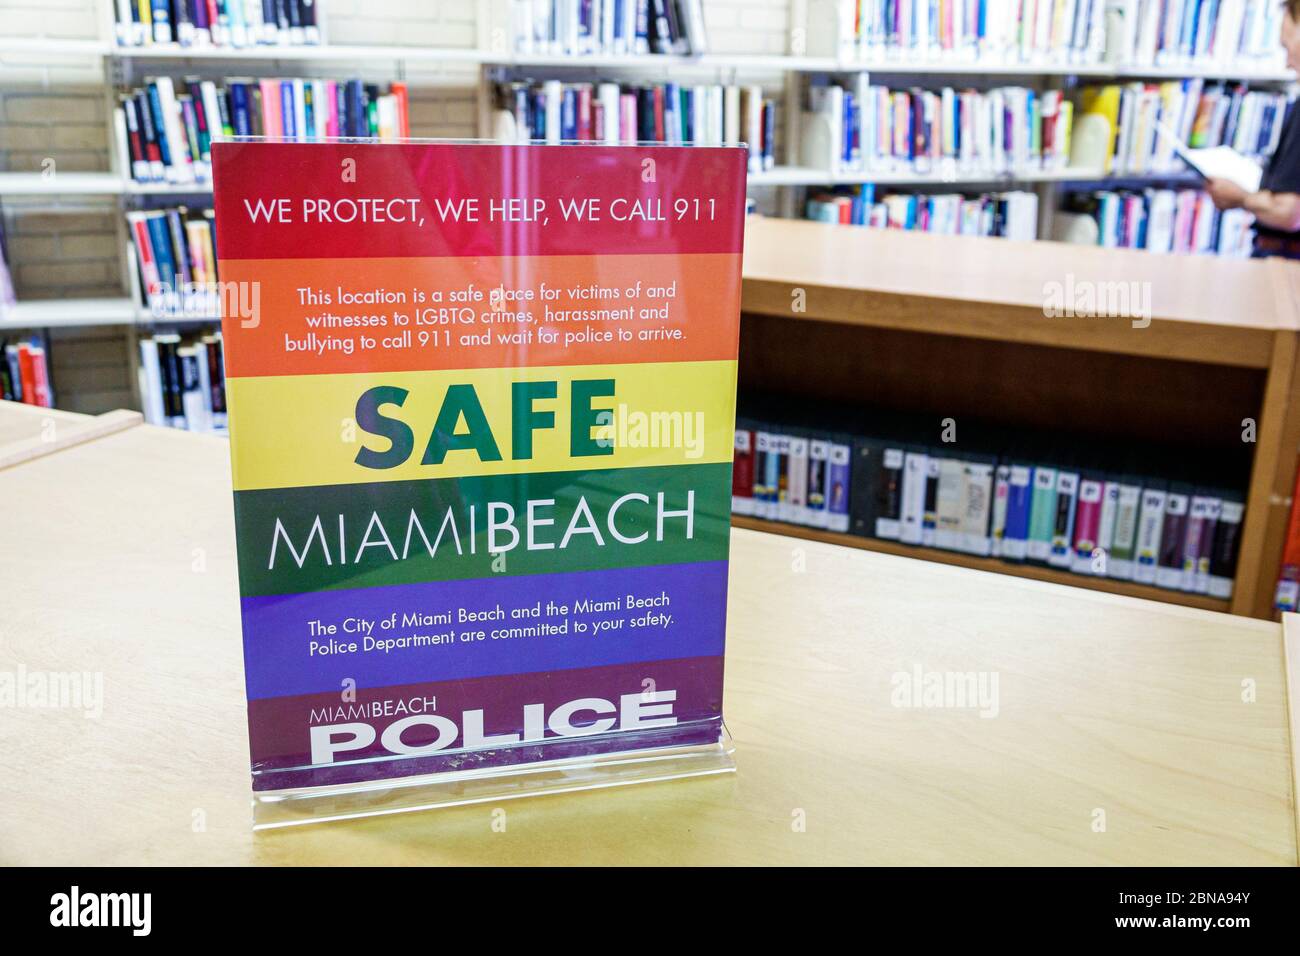 Miami Beach Florida,North Shore Public Library,sign safe place LGBTQ victims witnesses hate crimes,harassment bullying call 911 police,community safet Stock Photo